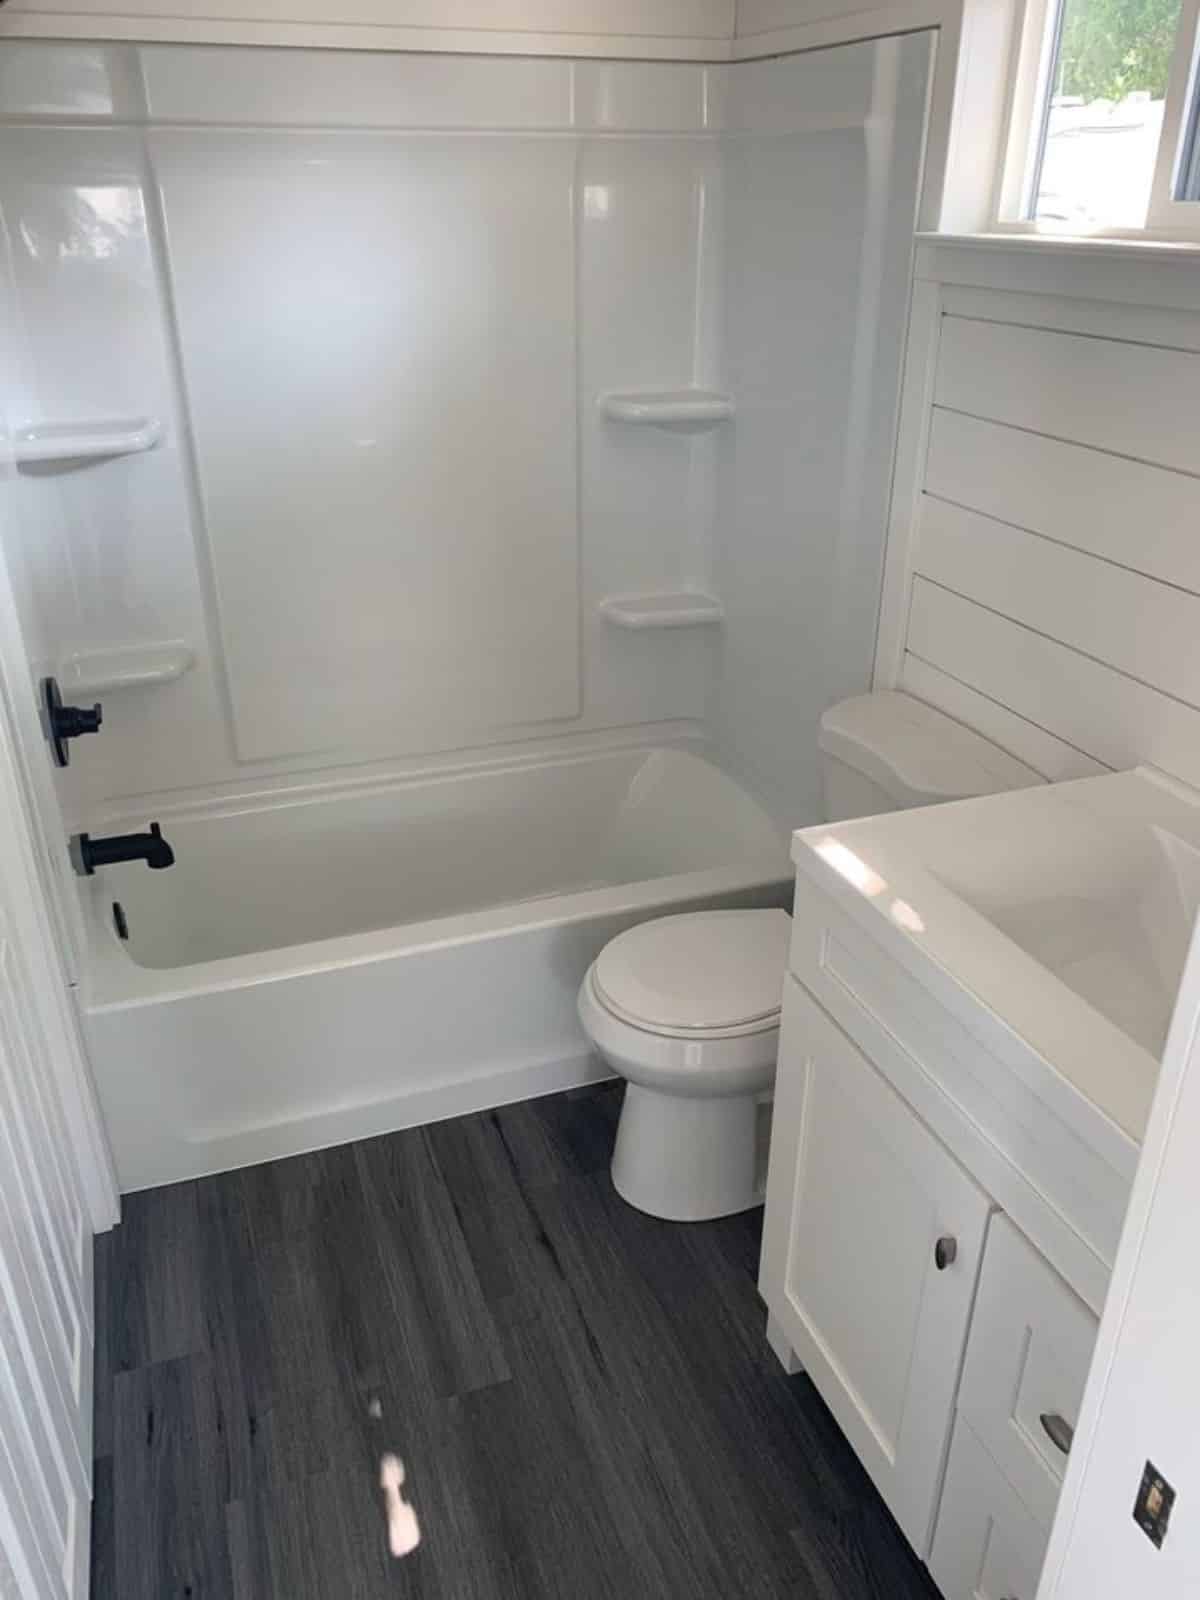 Bathroom of 28' Tiny House has a standard toilet, sink and highlighted point is the bath tub